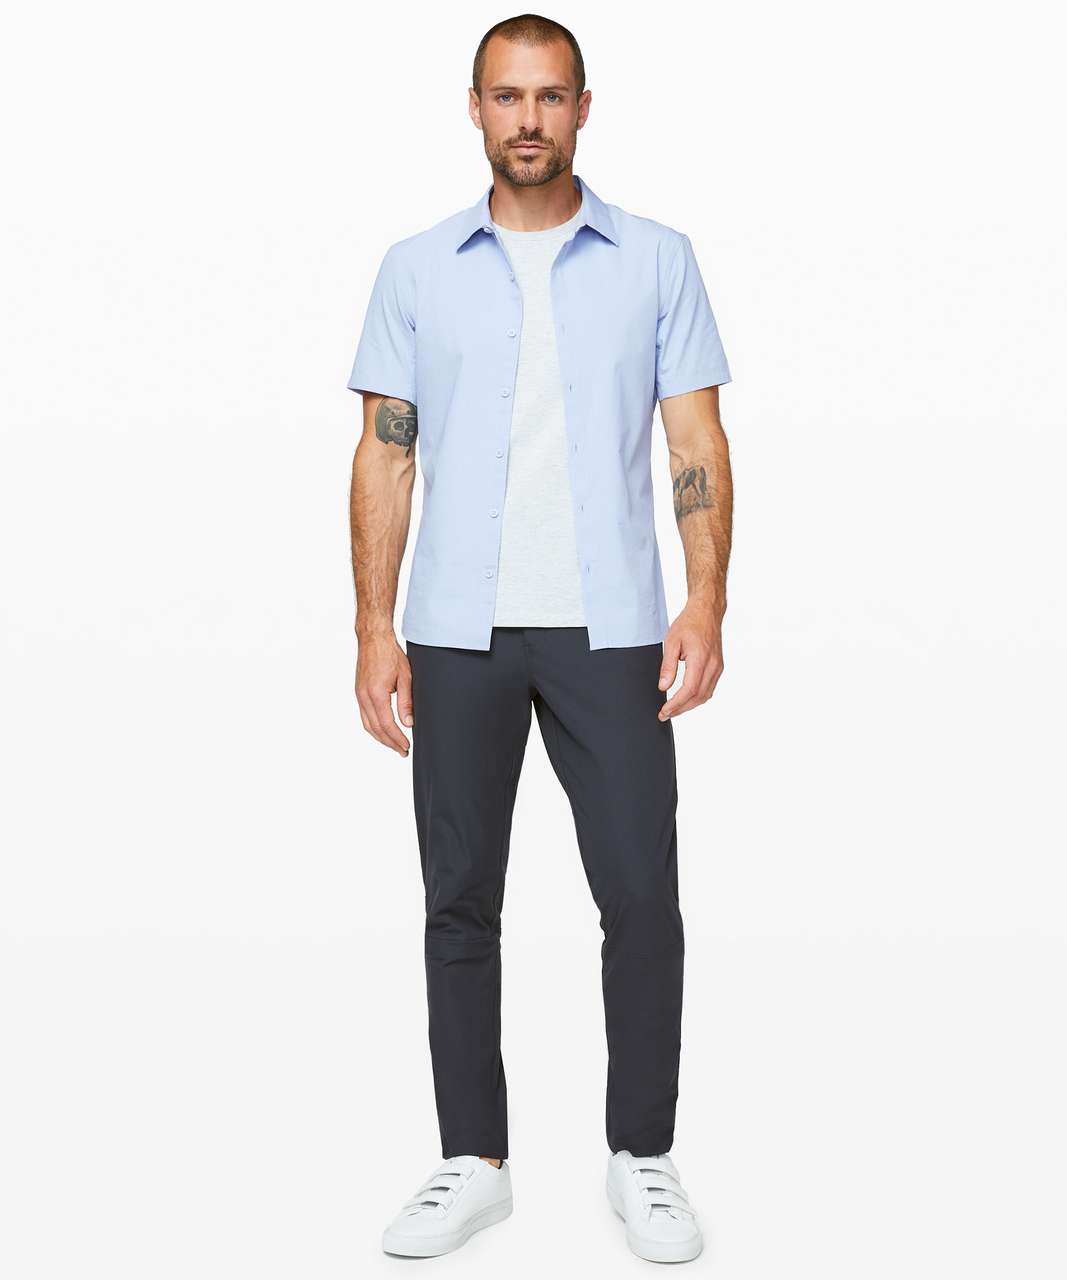 Lululemon Down to the Wire Slim Fit Short Sleeve - Heathered Oasis Blue (First Release)